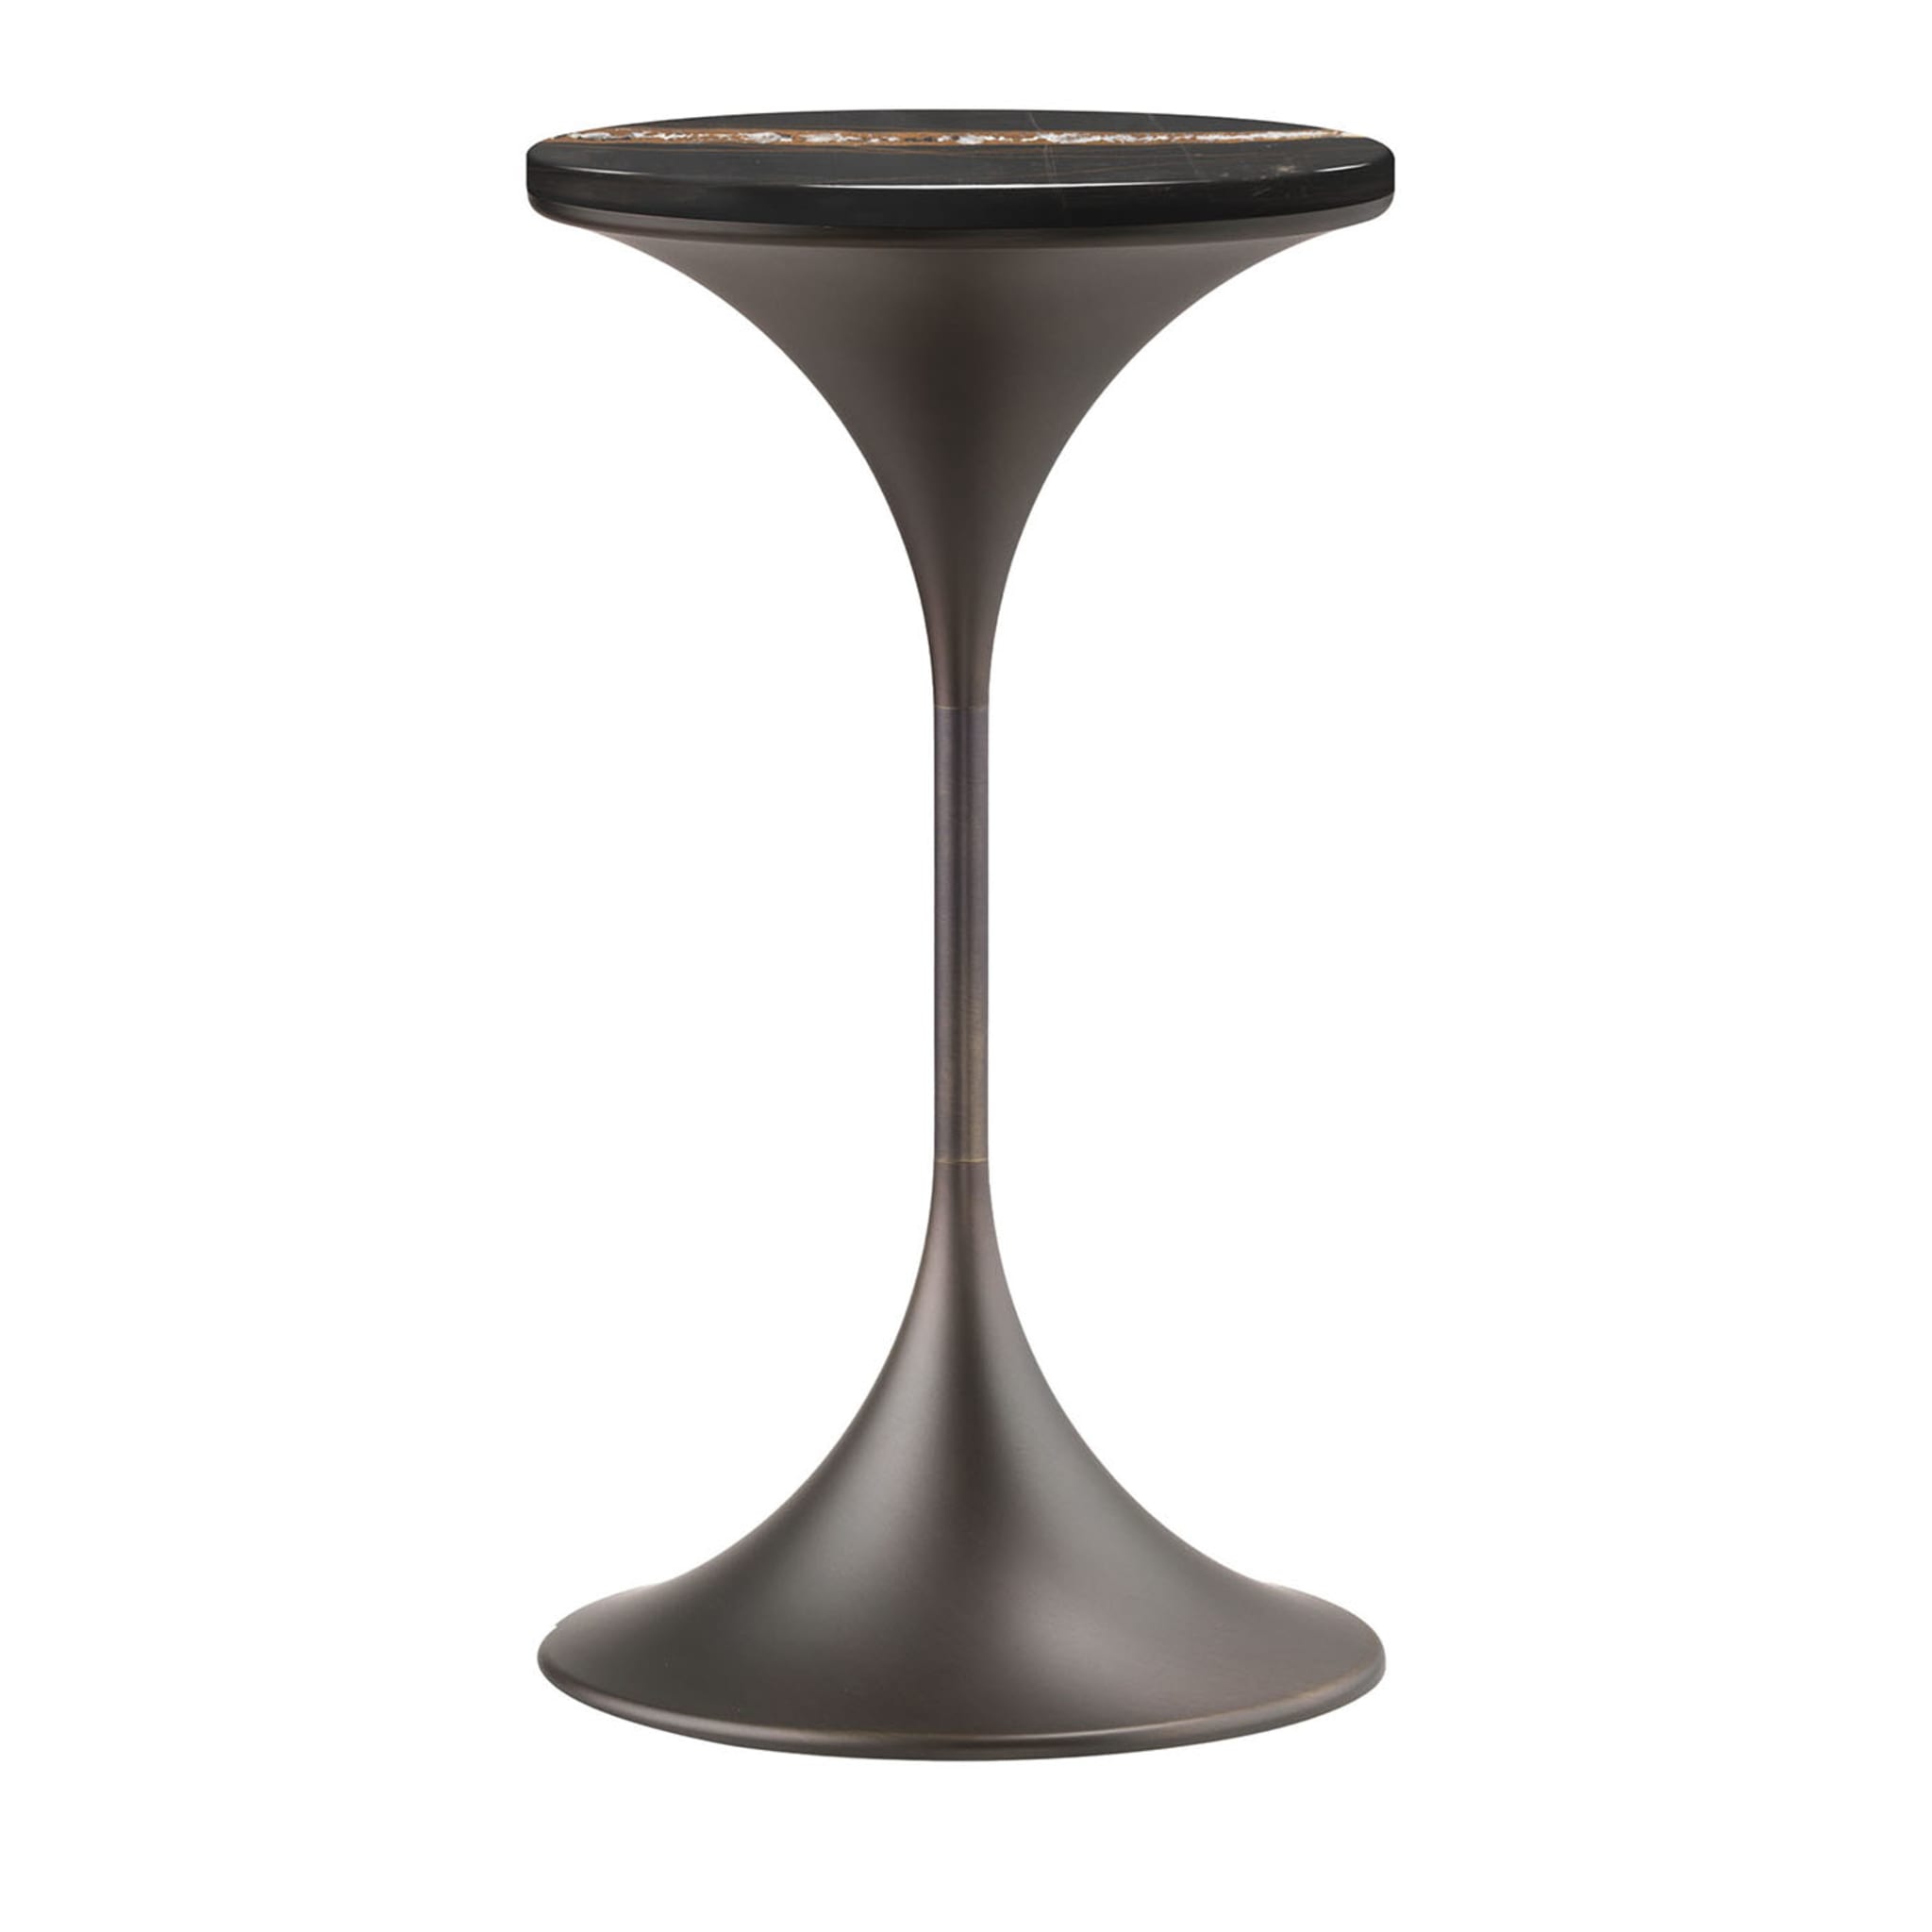 Dapertutto Tall Sahara Noir Brown Side Table by Paolo Rizzatto - Main view